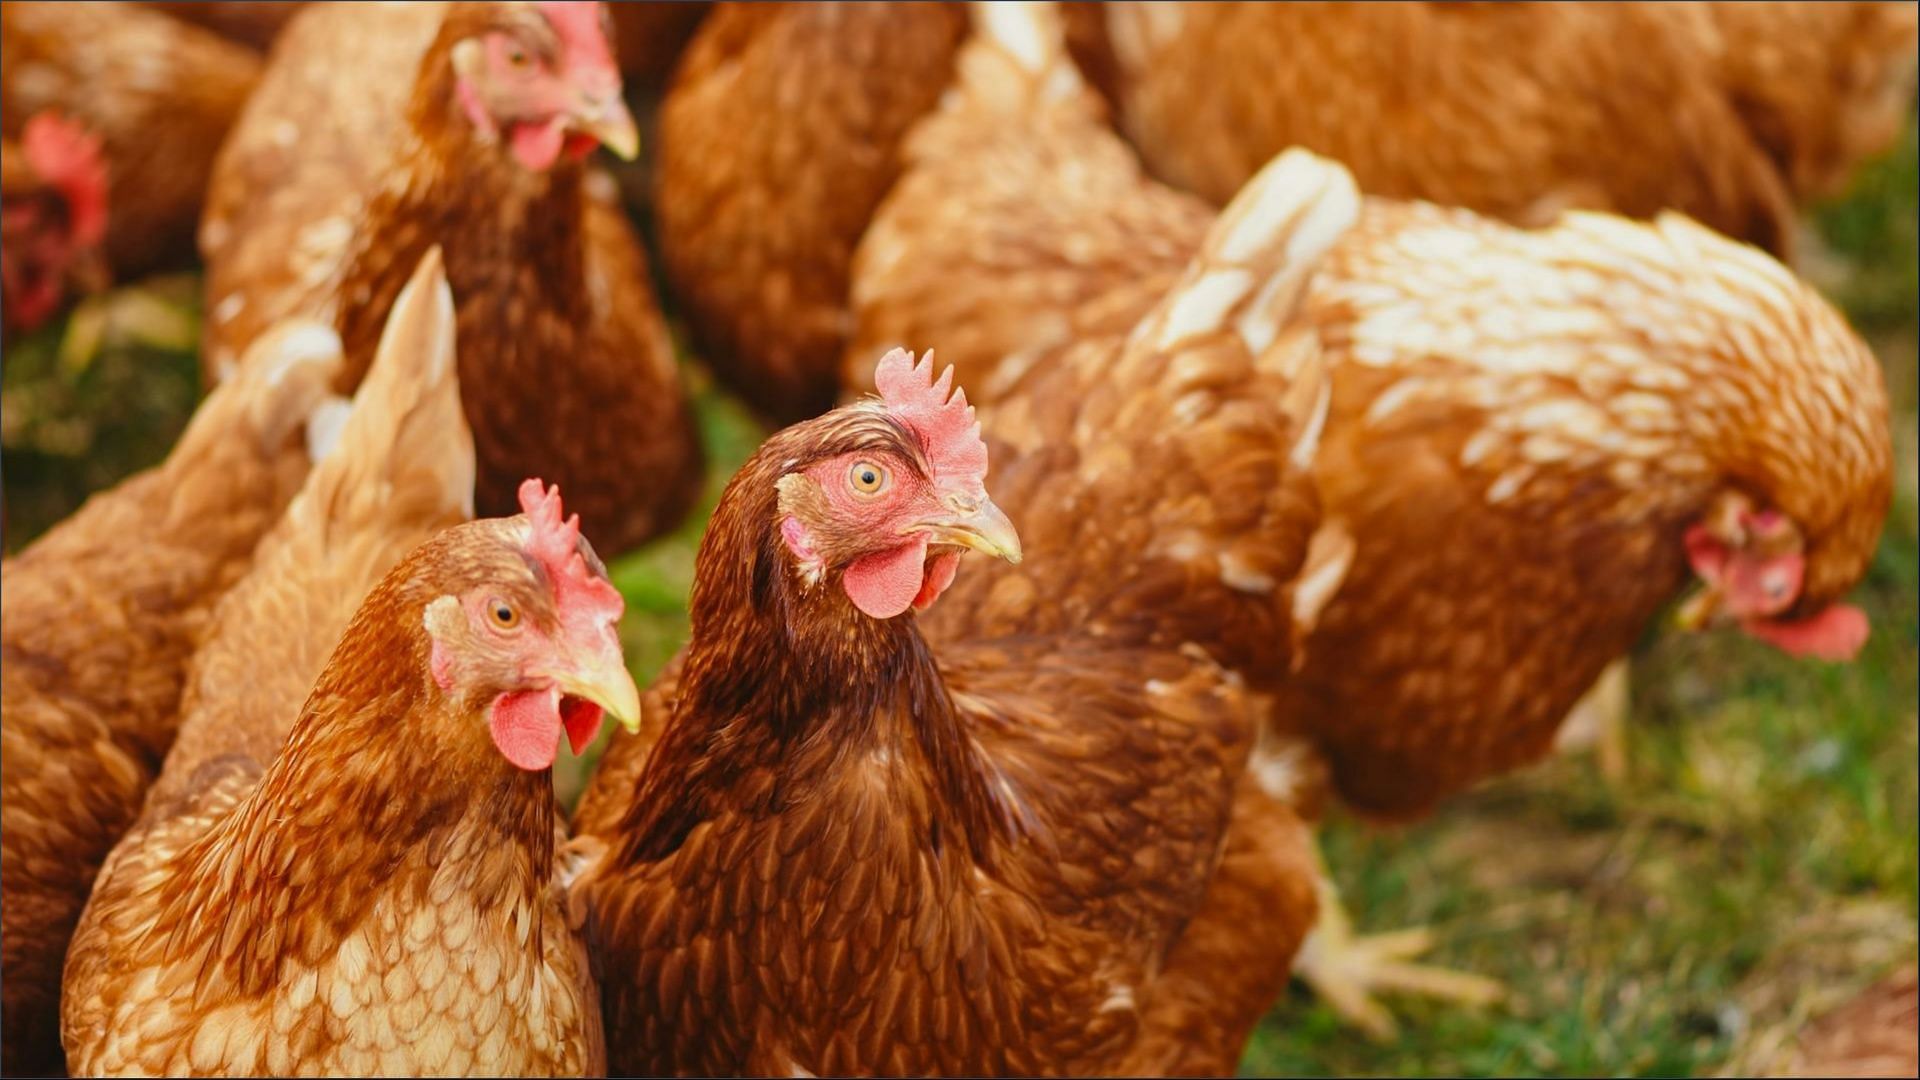 The bird flu outbreak caused the loss of over 1.6 million laying hens at the Parmer County facility (Image via Alexas Fotos / Pexels)